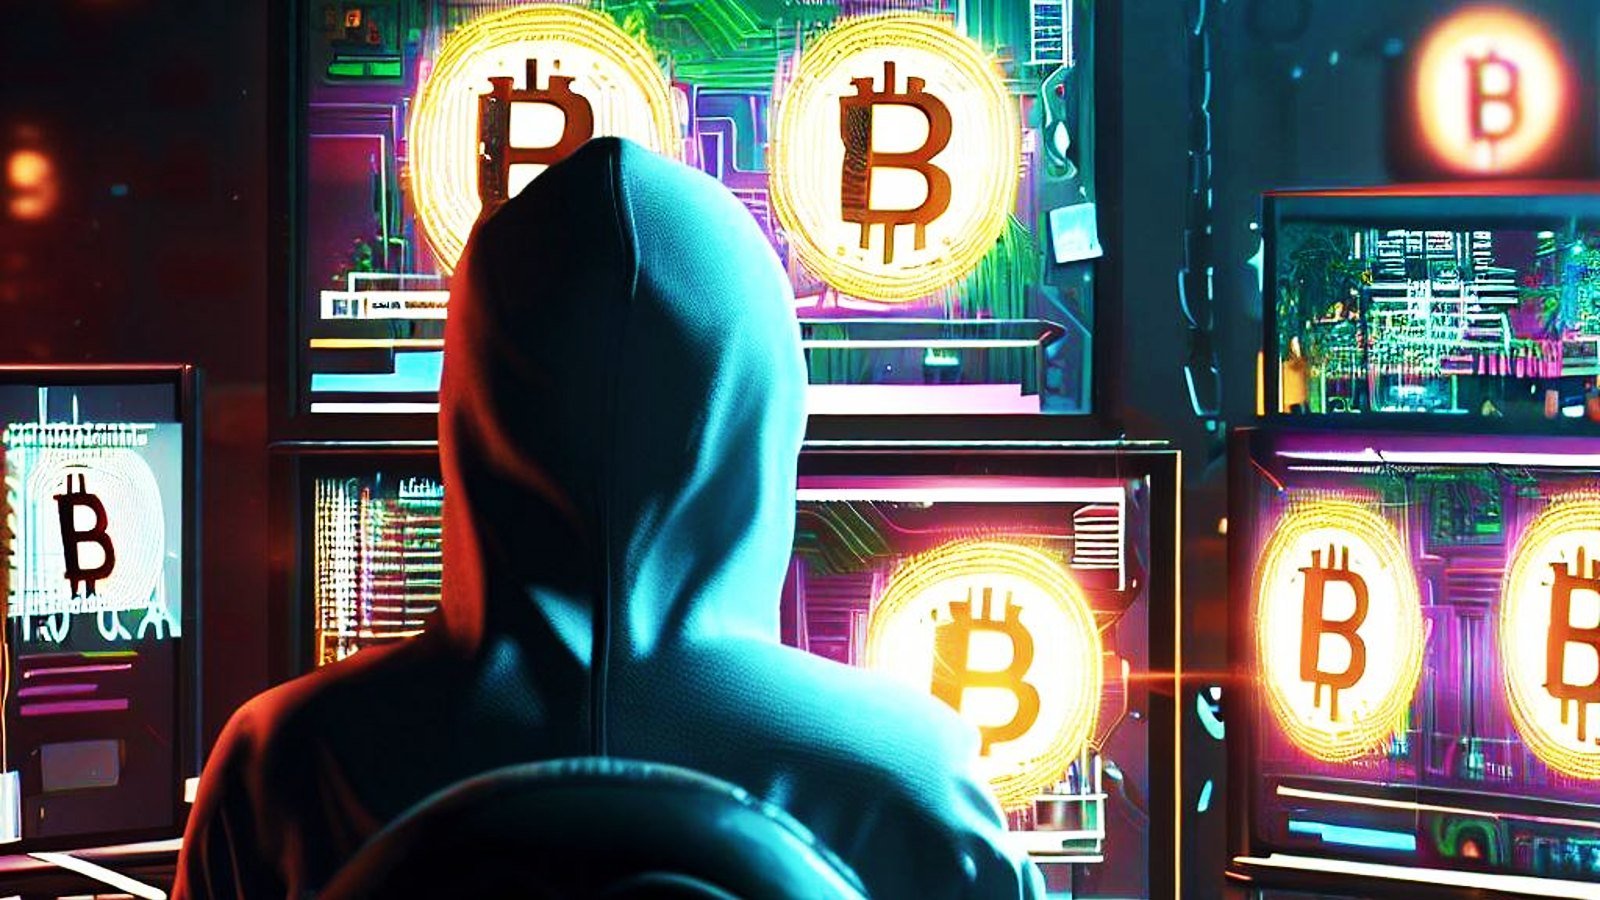 CoinsPaid blames Lazarus hackers for theft of $37,300,000 in crypto – Source: www.bleepingcomputer.com